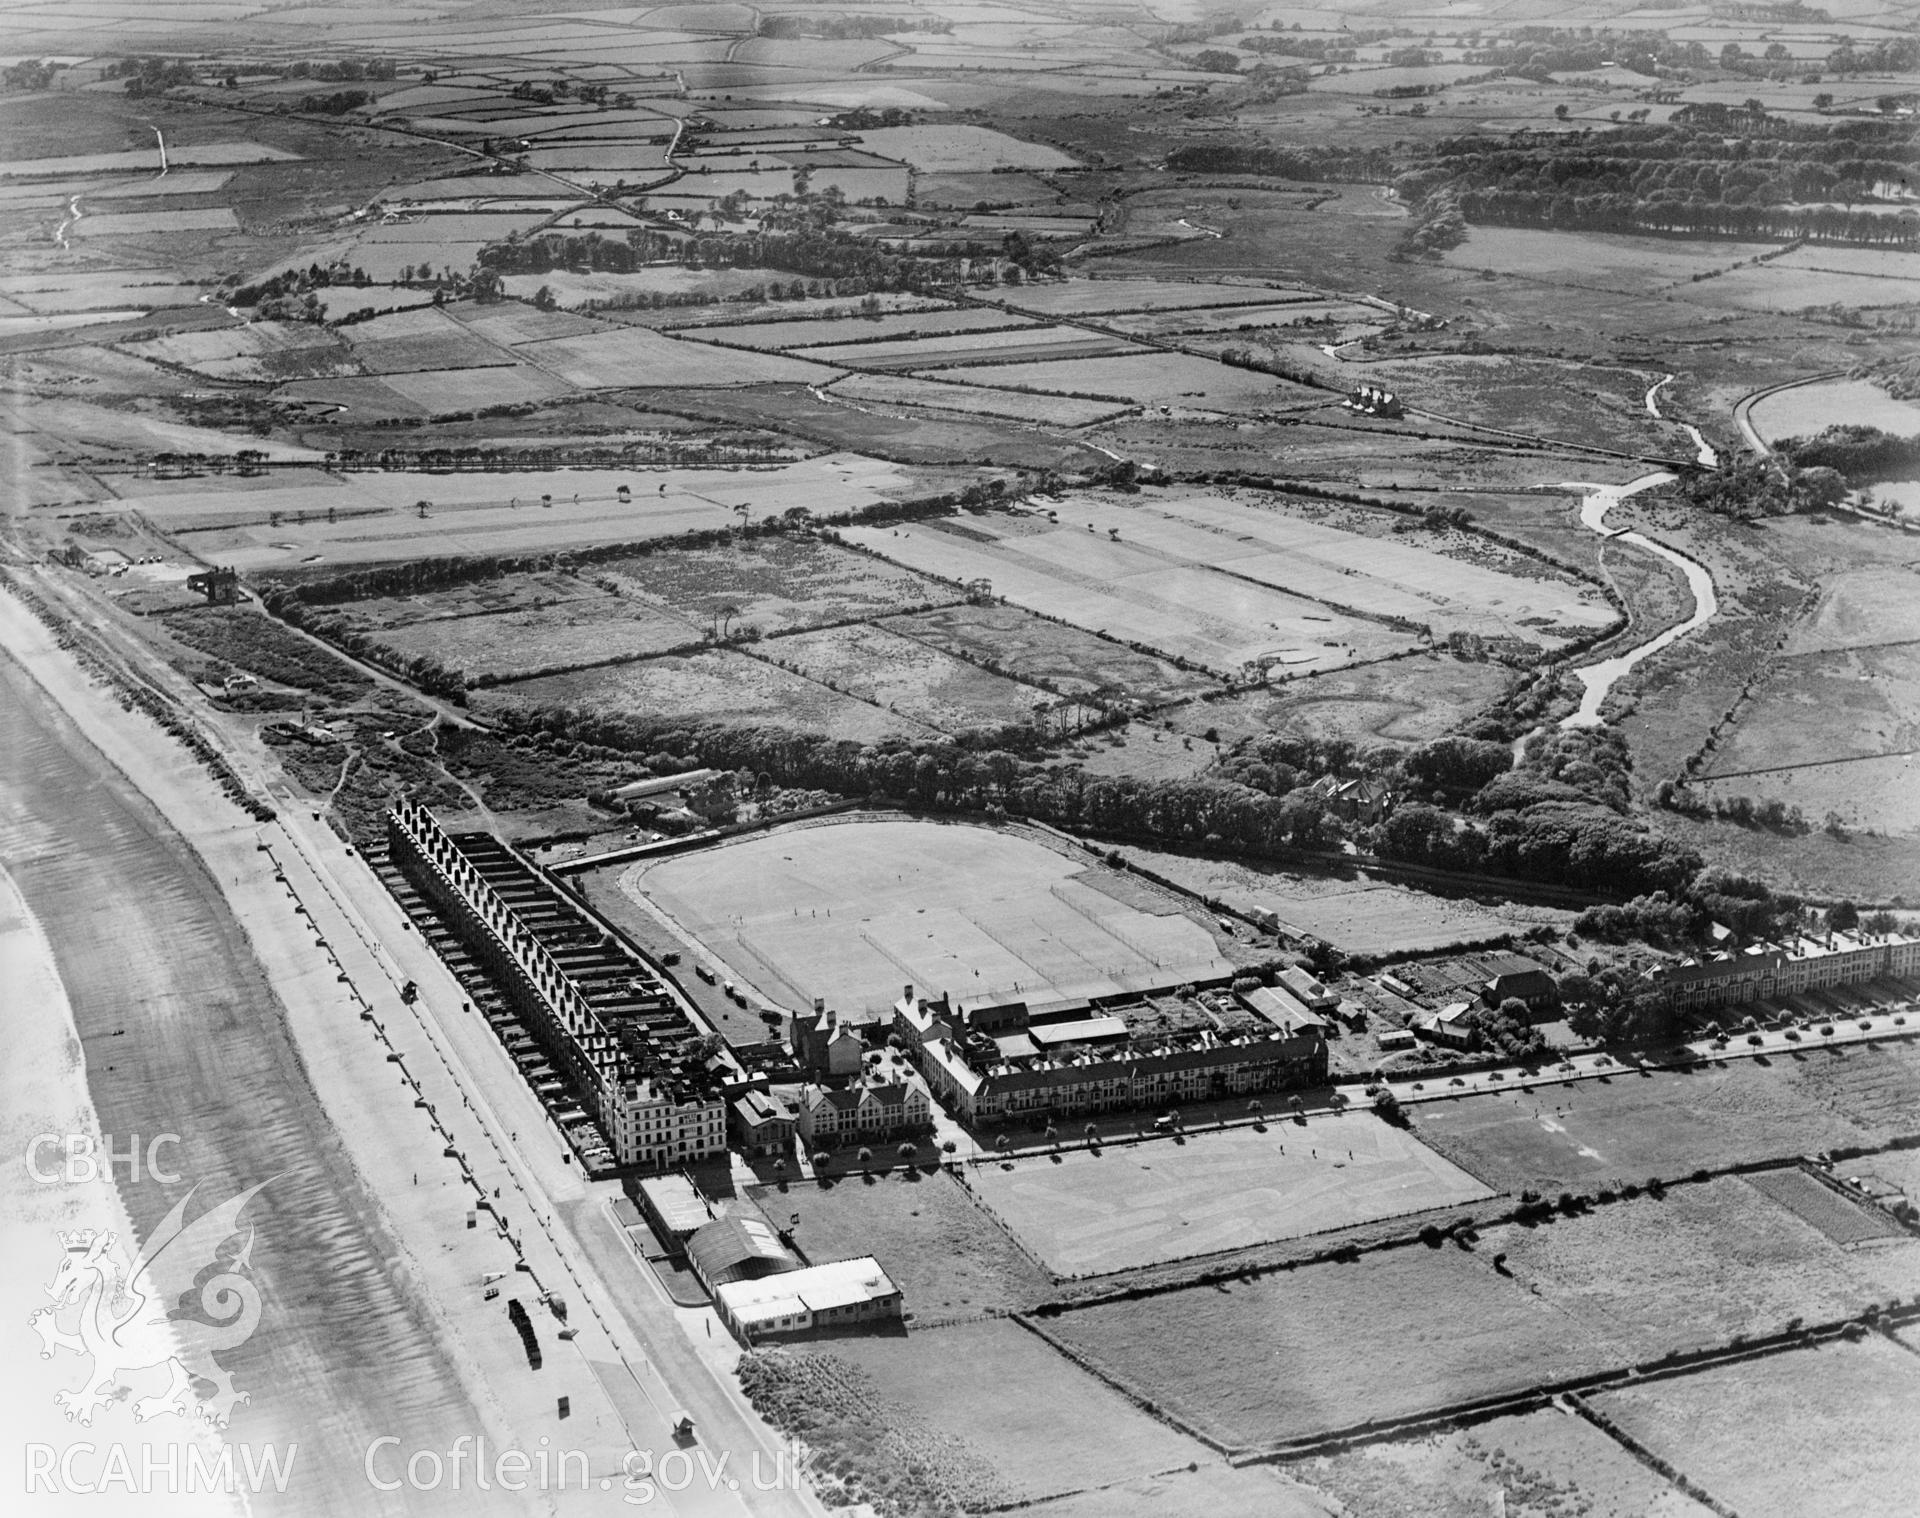 View of Pwllheli showing promenade and recreation ground, oblique aerial view. 5?x4? black and white glass plate negative.